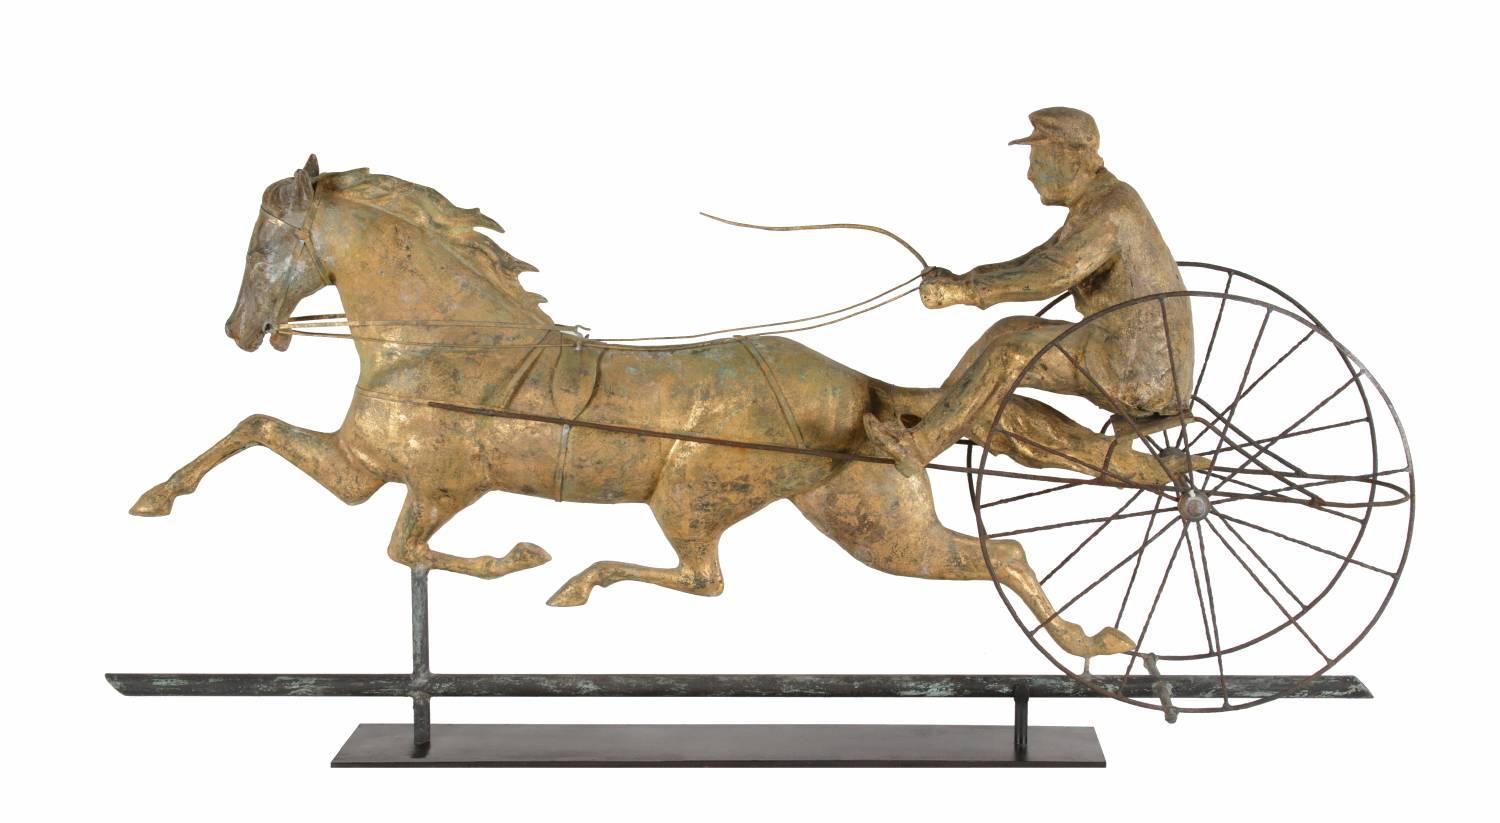 THE HORSE GEORGE M. PATCHEN WITH A SULKEY AND DRIVER, ONE OF THE LARGEST AND MOST IMPRESSIVE AMONG THIS FORM OF WEATHERVANE, UNIDENTIFIED MAKER, ca 1860-1890's :

This is the horse George M. Patchen with a sulky and driver. Made of hammered copper